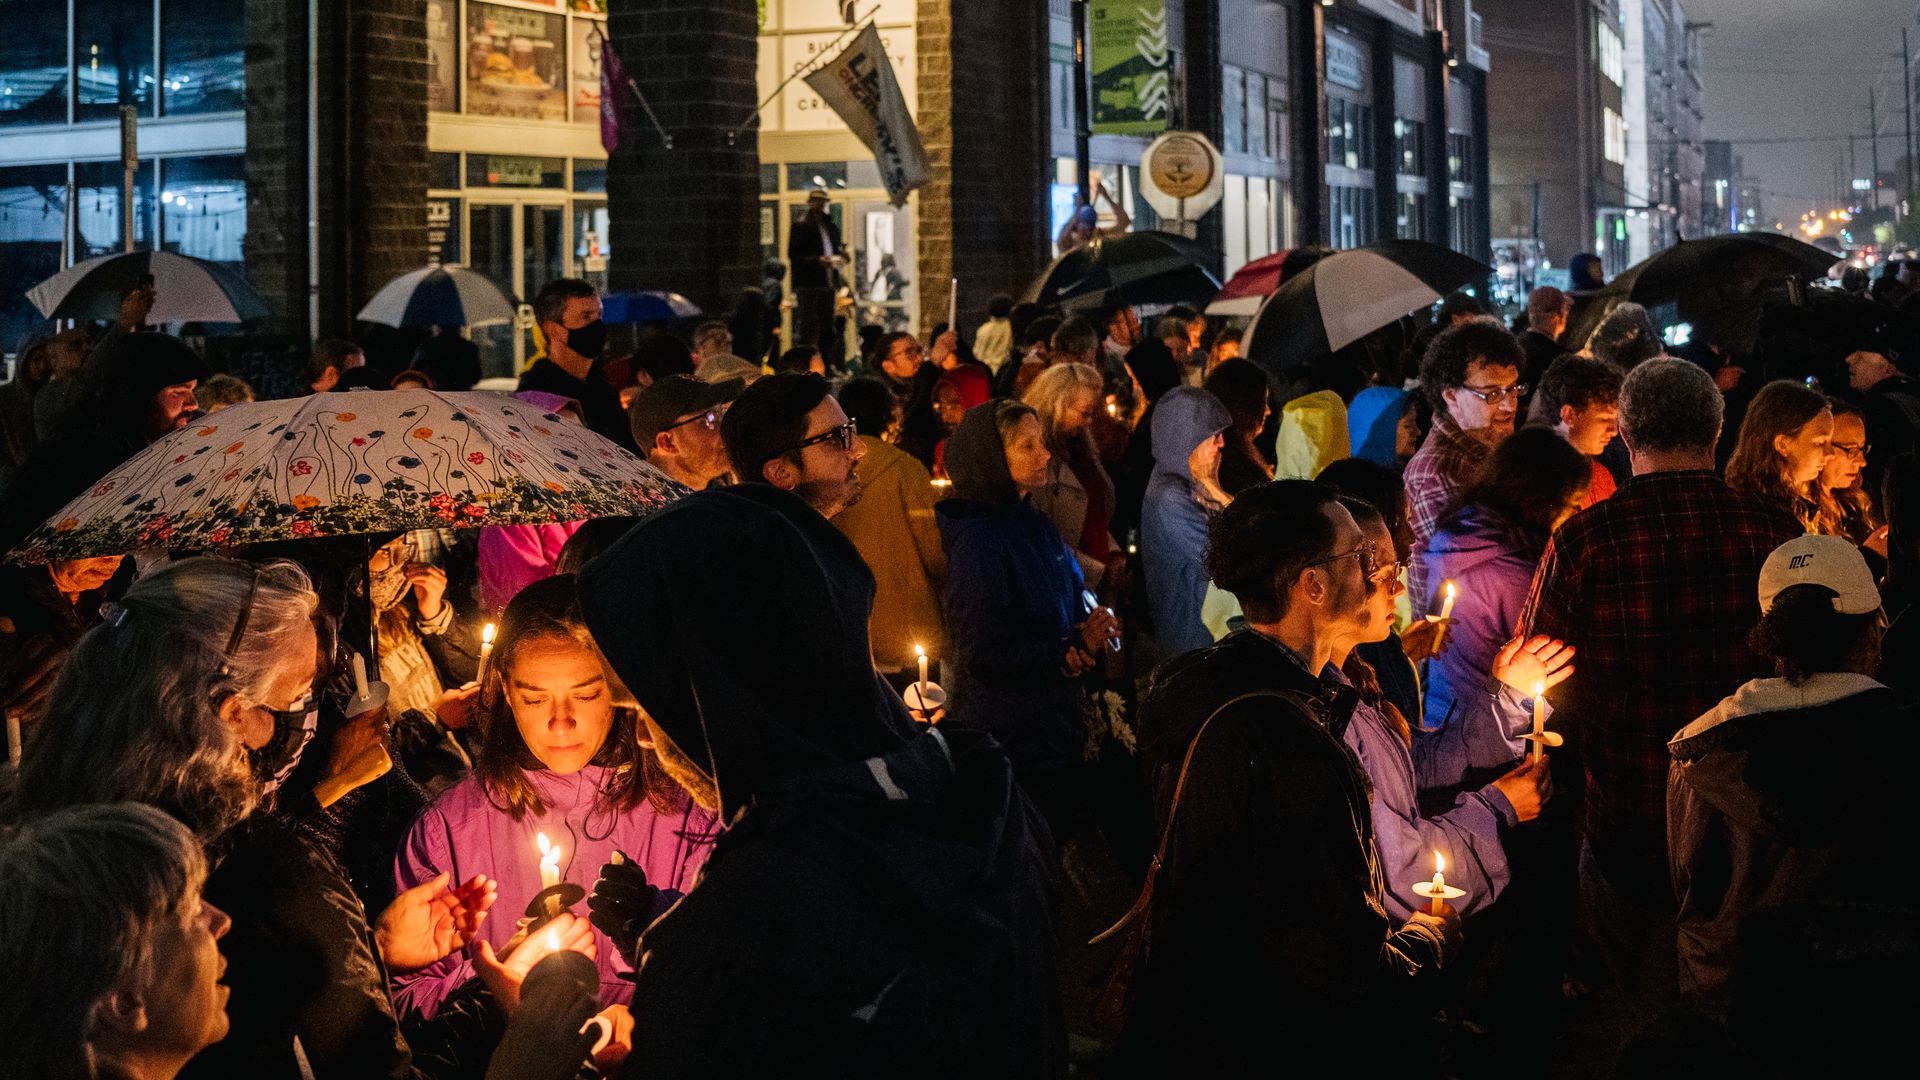 : People partake in a candlelight vigil in the Greenwood district during commemorations of the 100th anniversary of the Tulsa Race Massacre on May 31, 2021 in Tulsa, Oklahoma